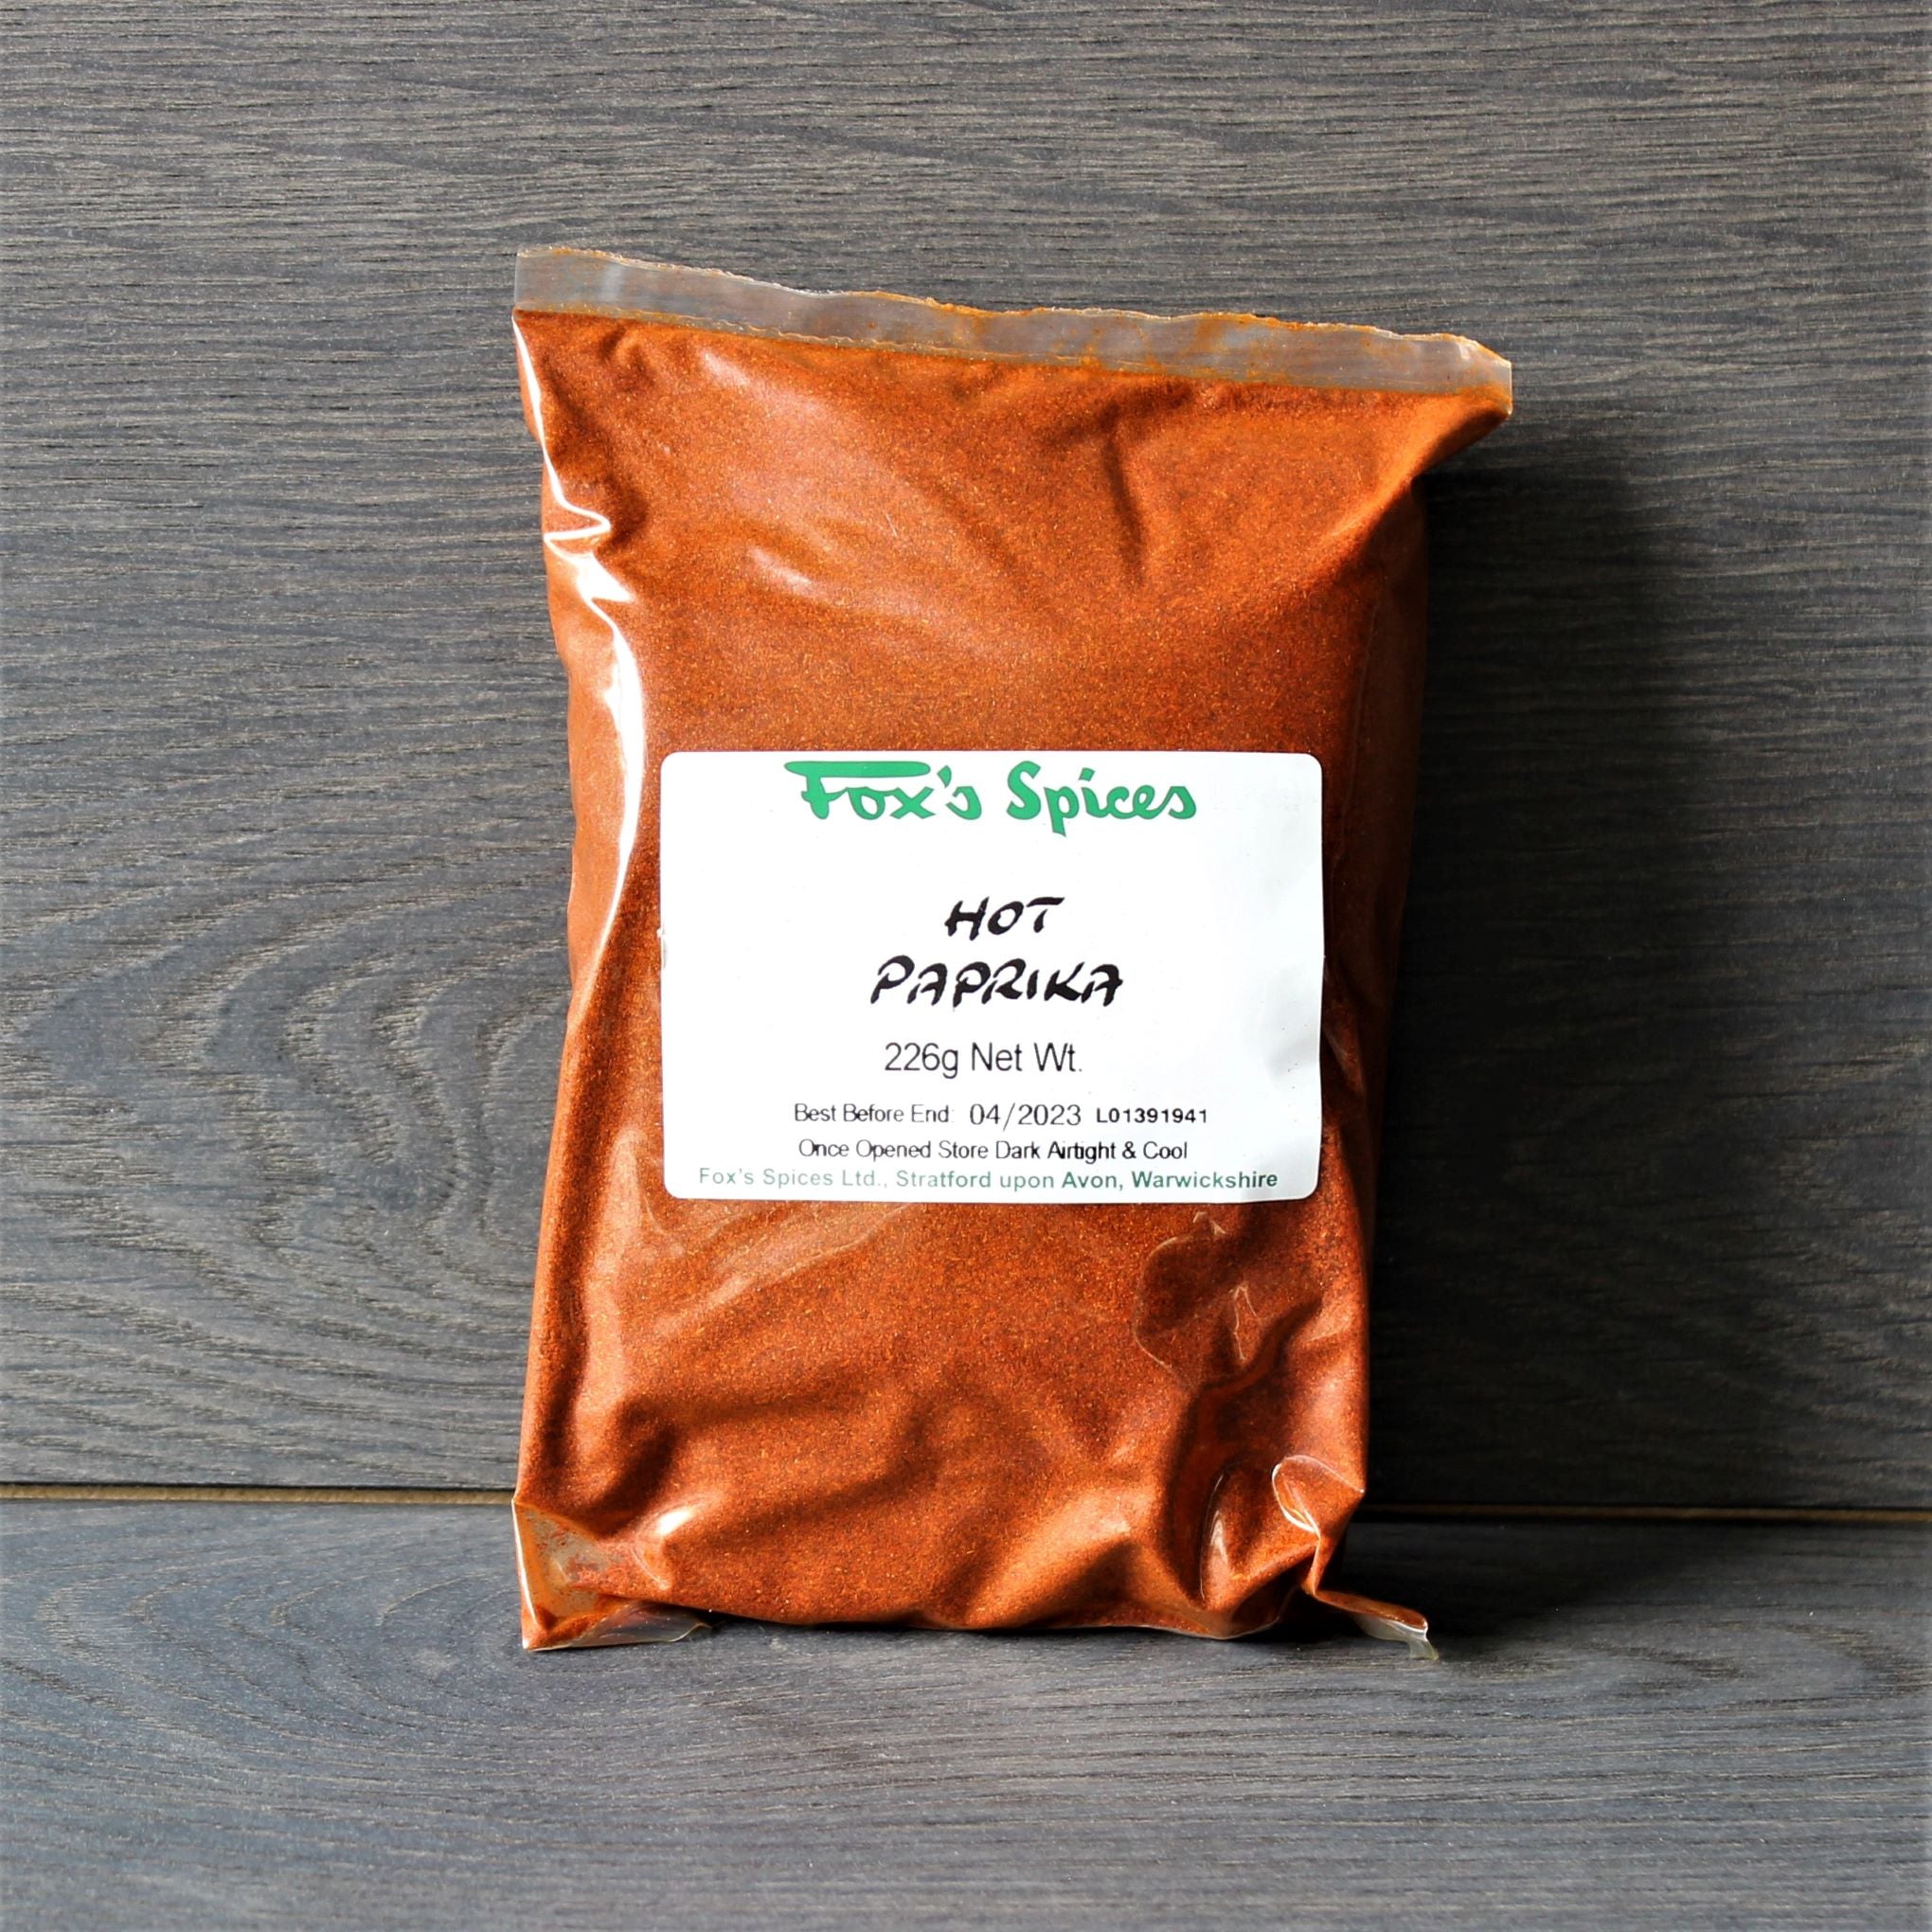 A 226g bag of Hot Paprika by Fox's Spices